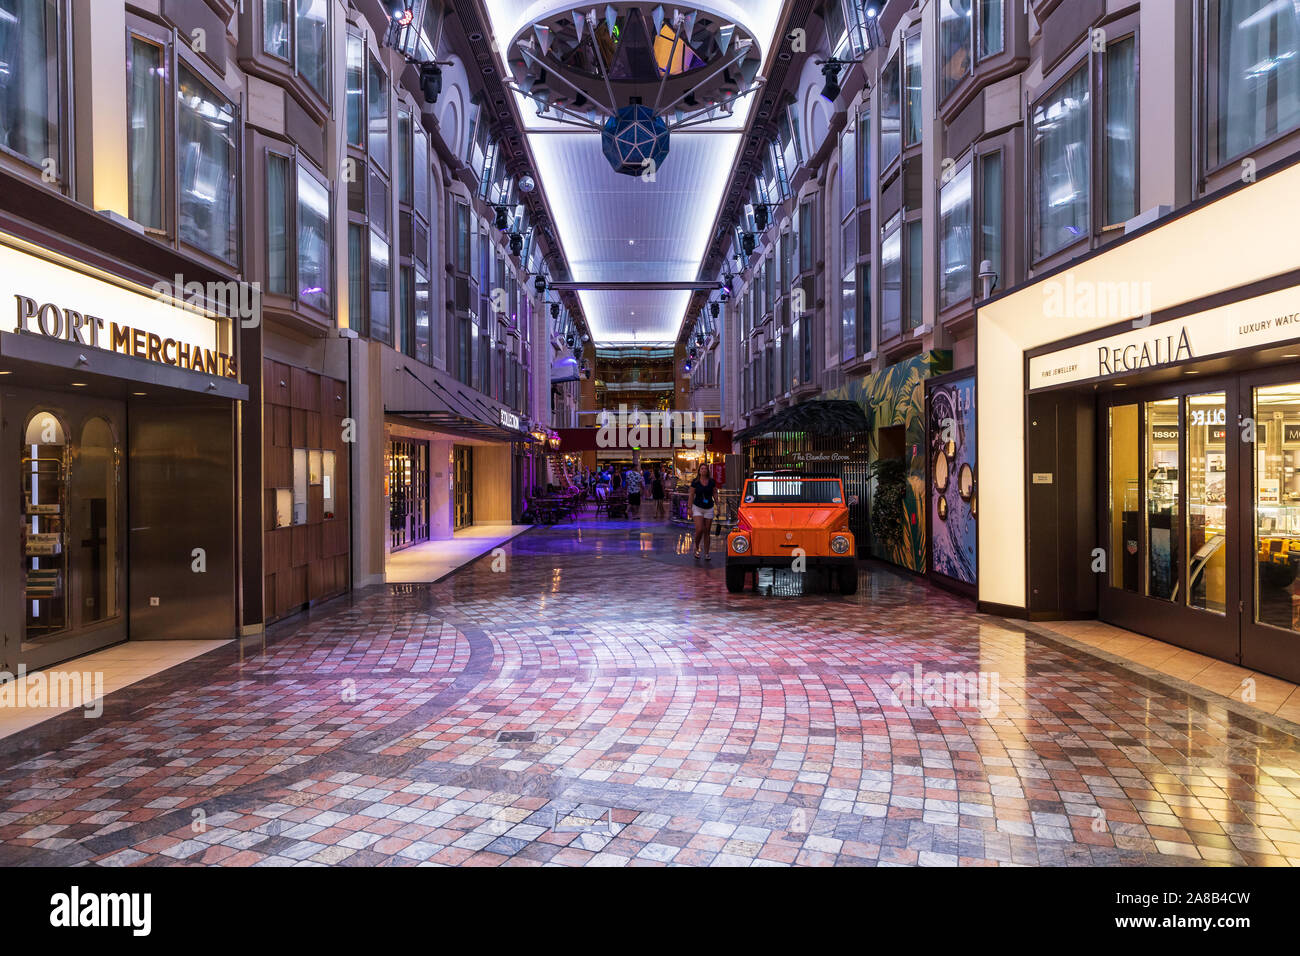 The Royal Promenade, aboard a Royal Caribbean cruise ship, features multiple restaurants and stores to shop in for the guests aboard. Stock Photo